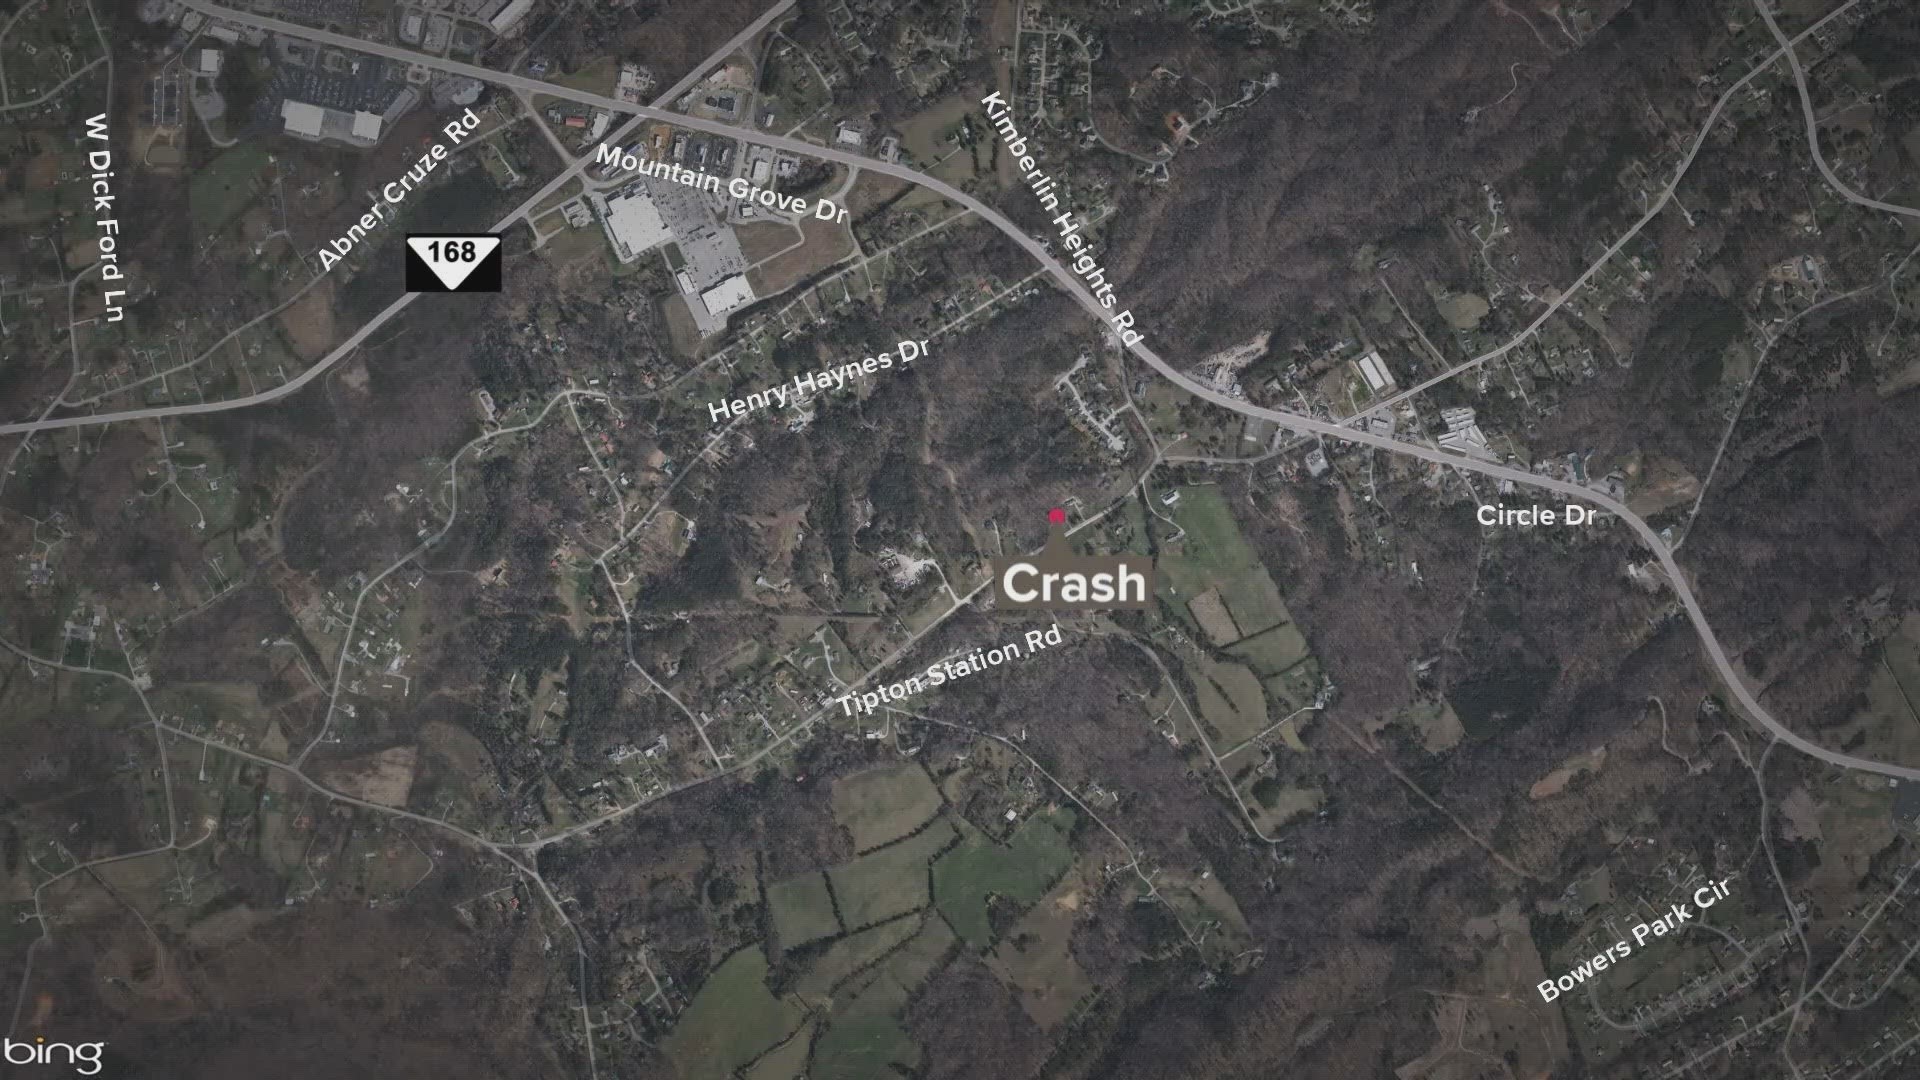 A man is dead after a car crashed into a utility pole and tree in Knox County. The sheriff's office report it happened Tipton Station Road.